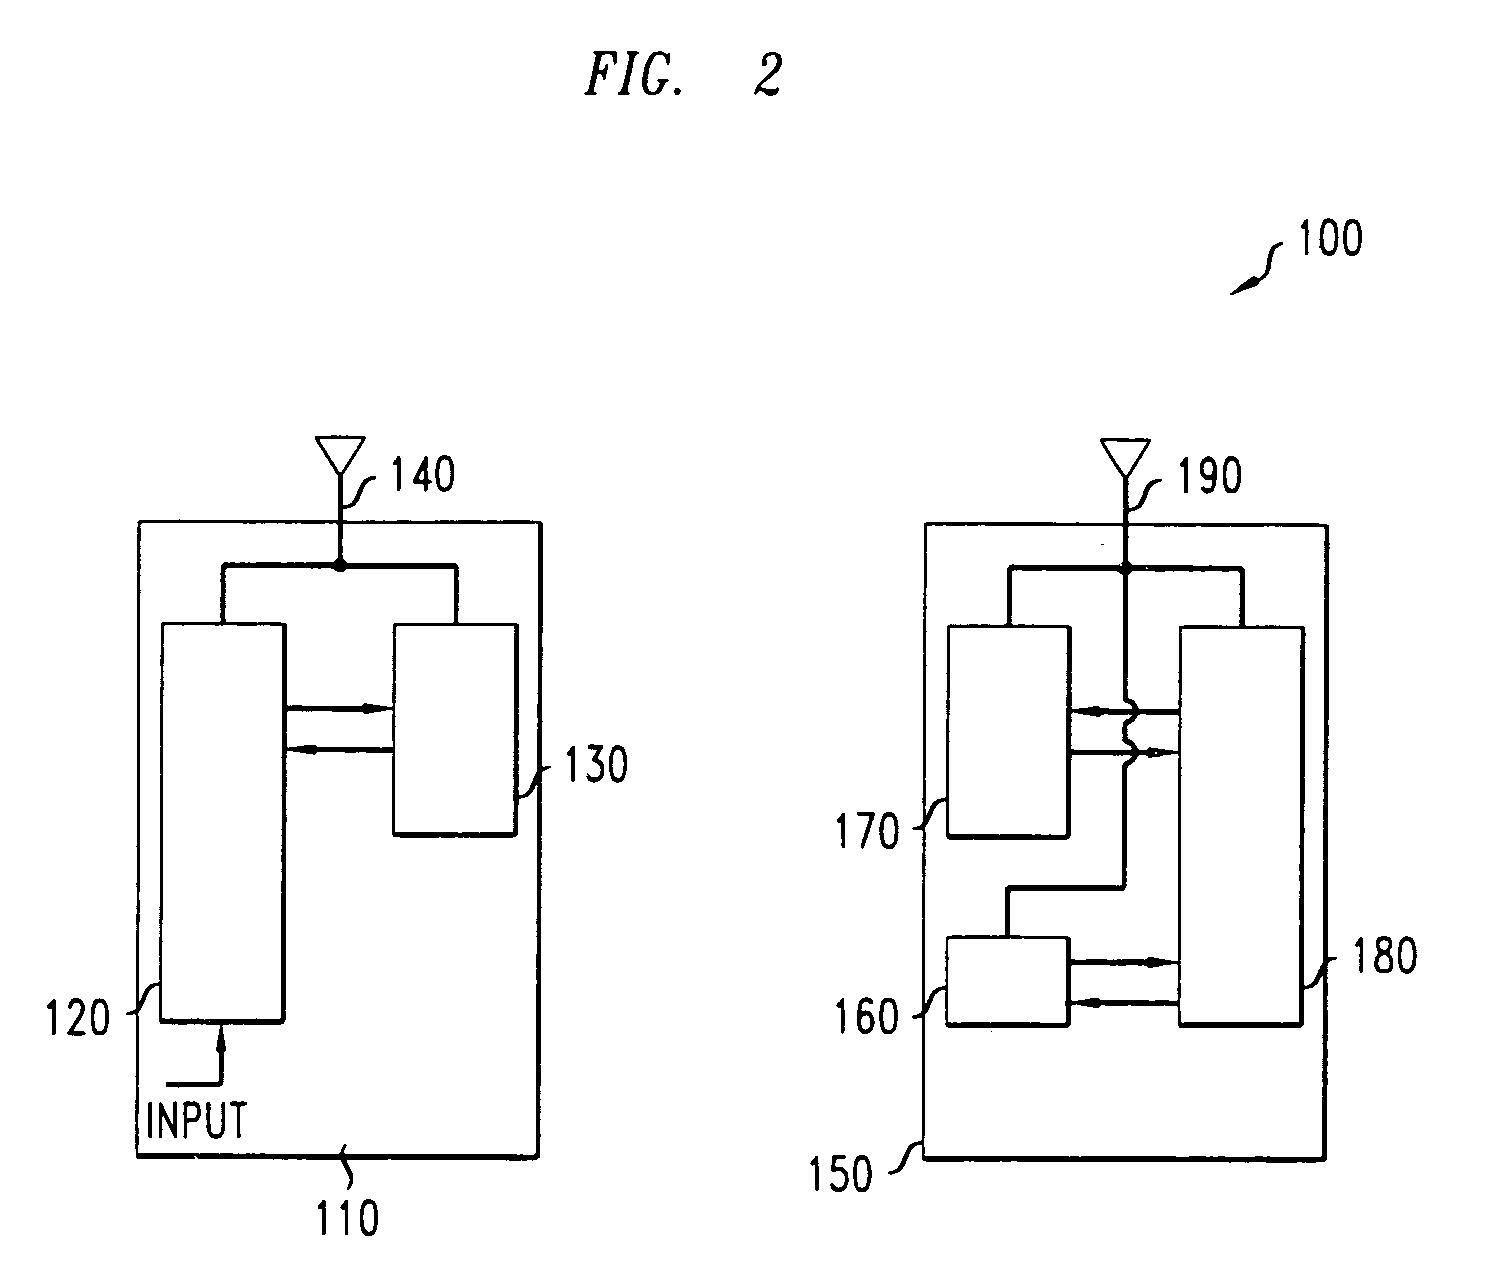 Method of data communication using a control message